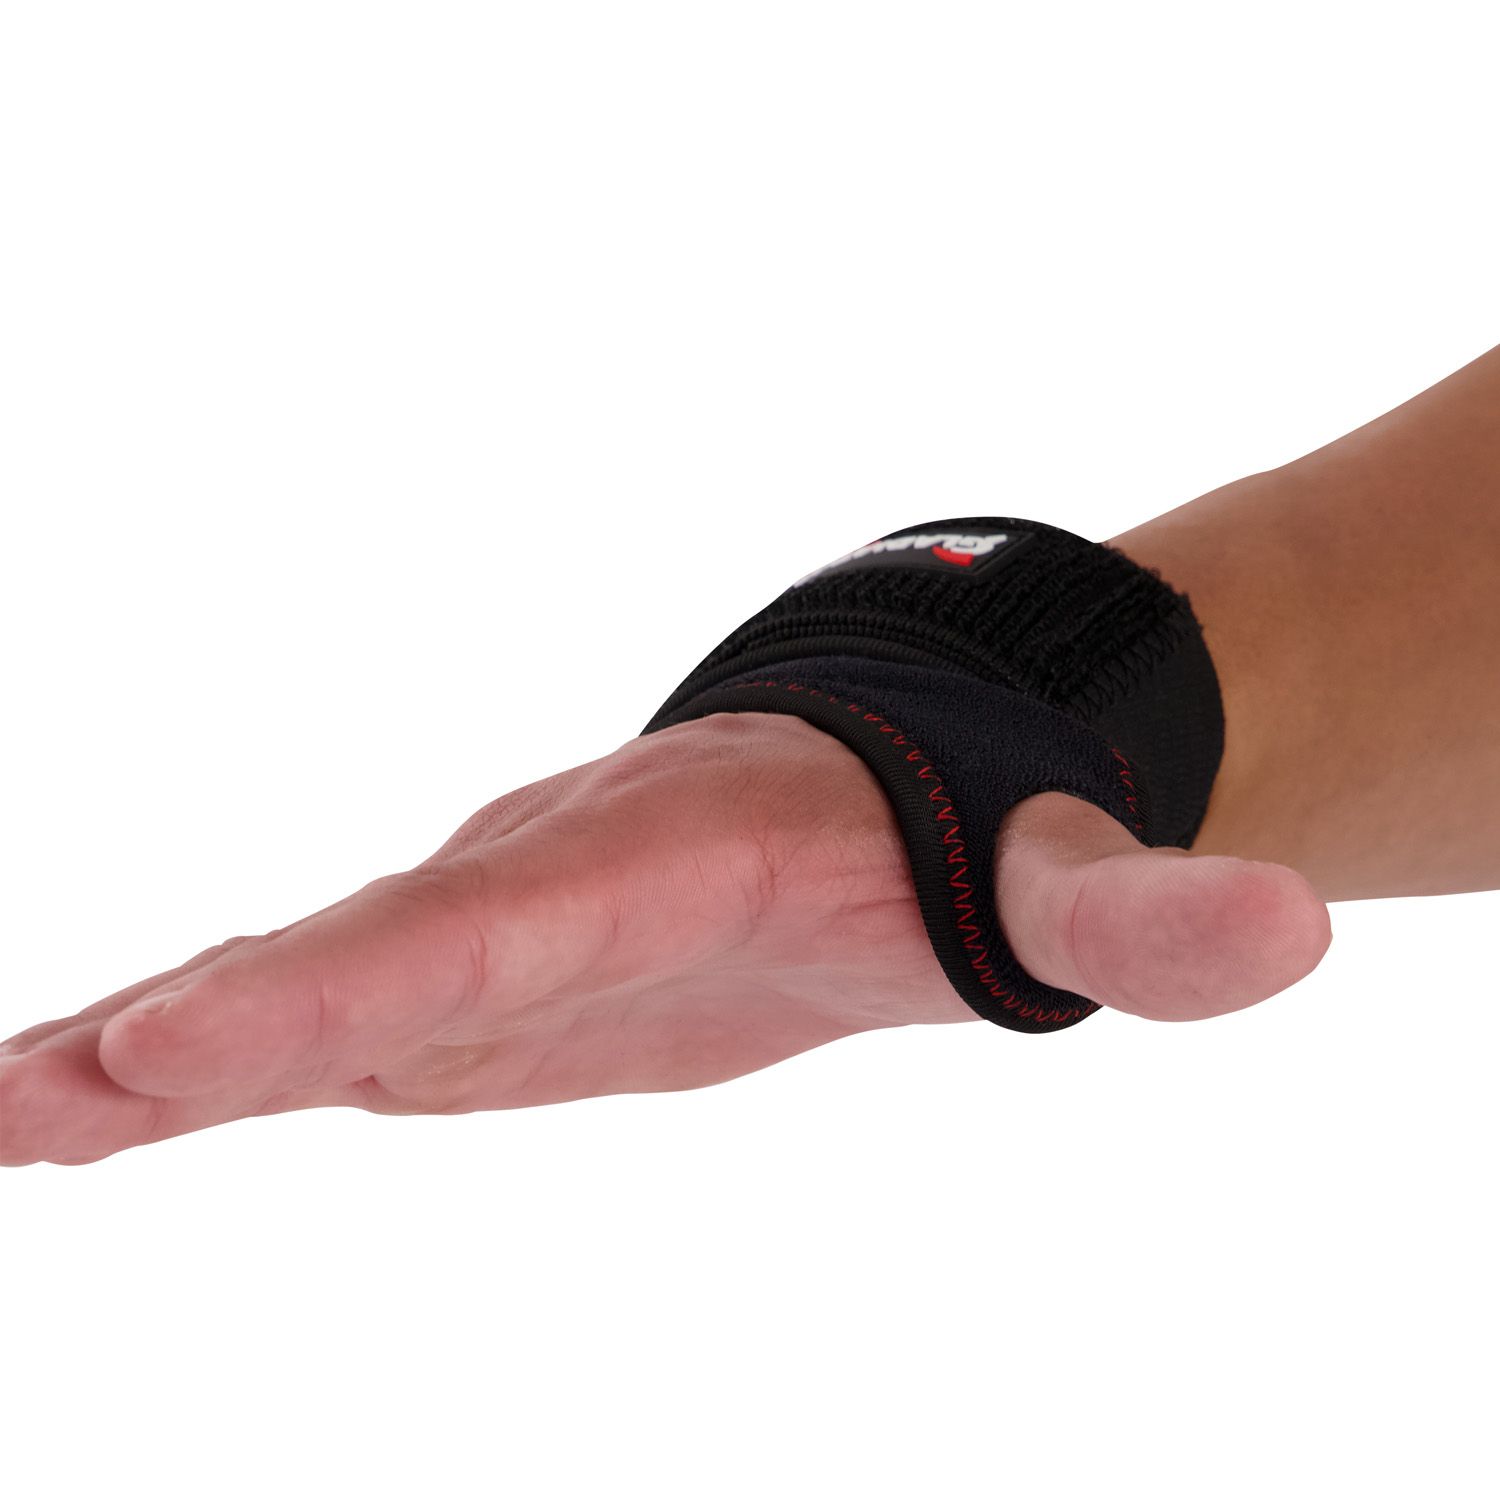 gladiator sports wrist support with thumb opening worn